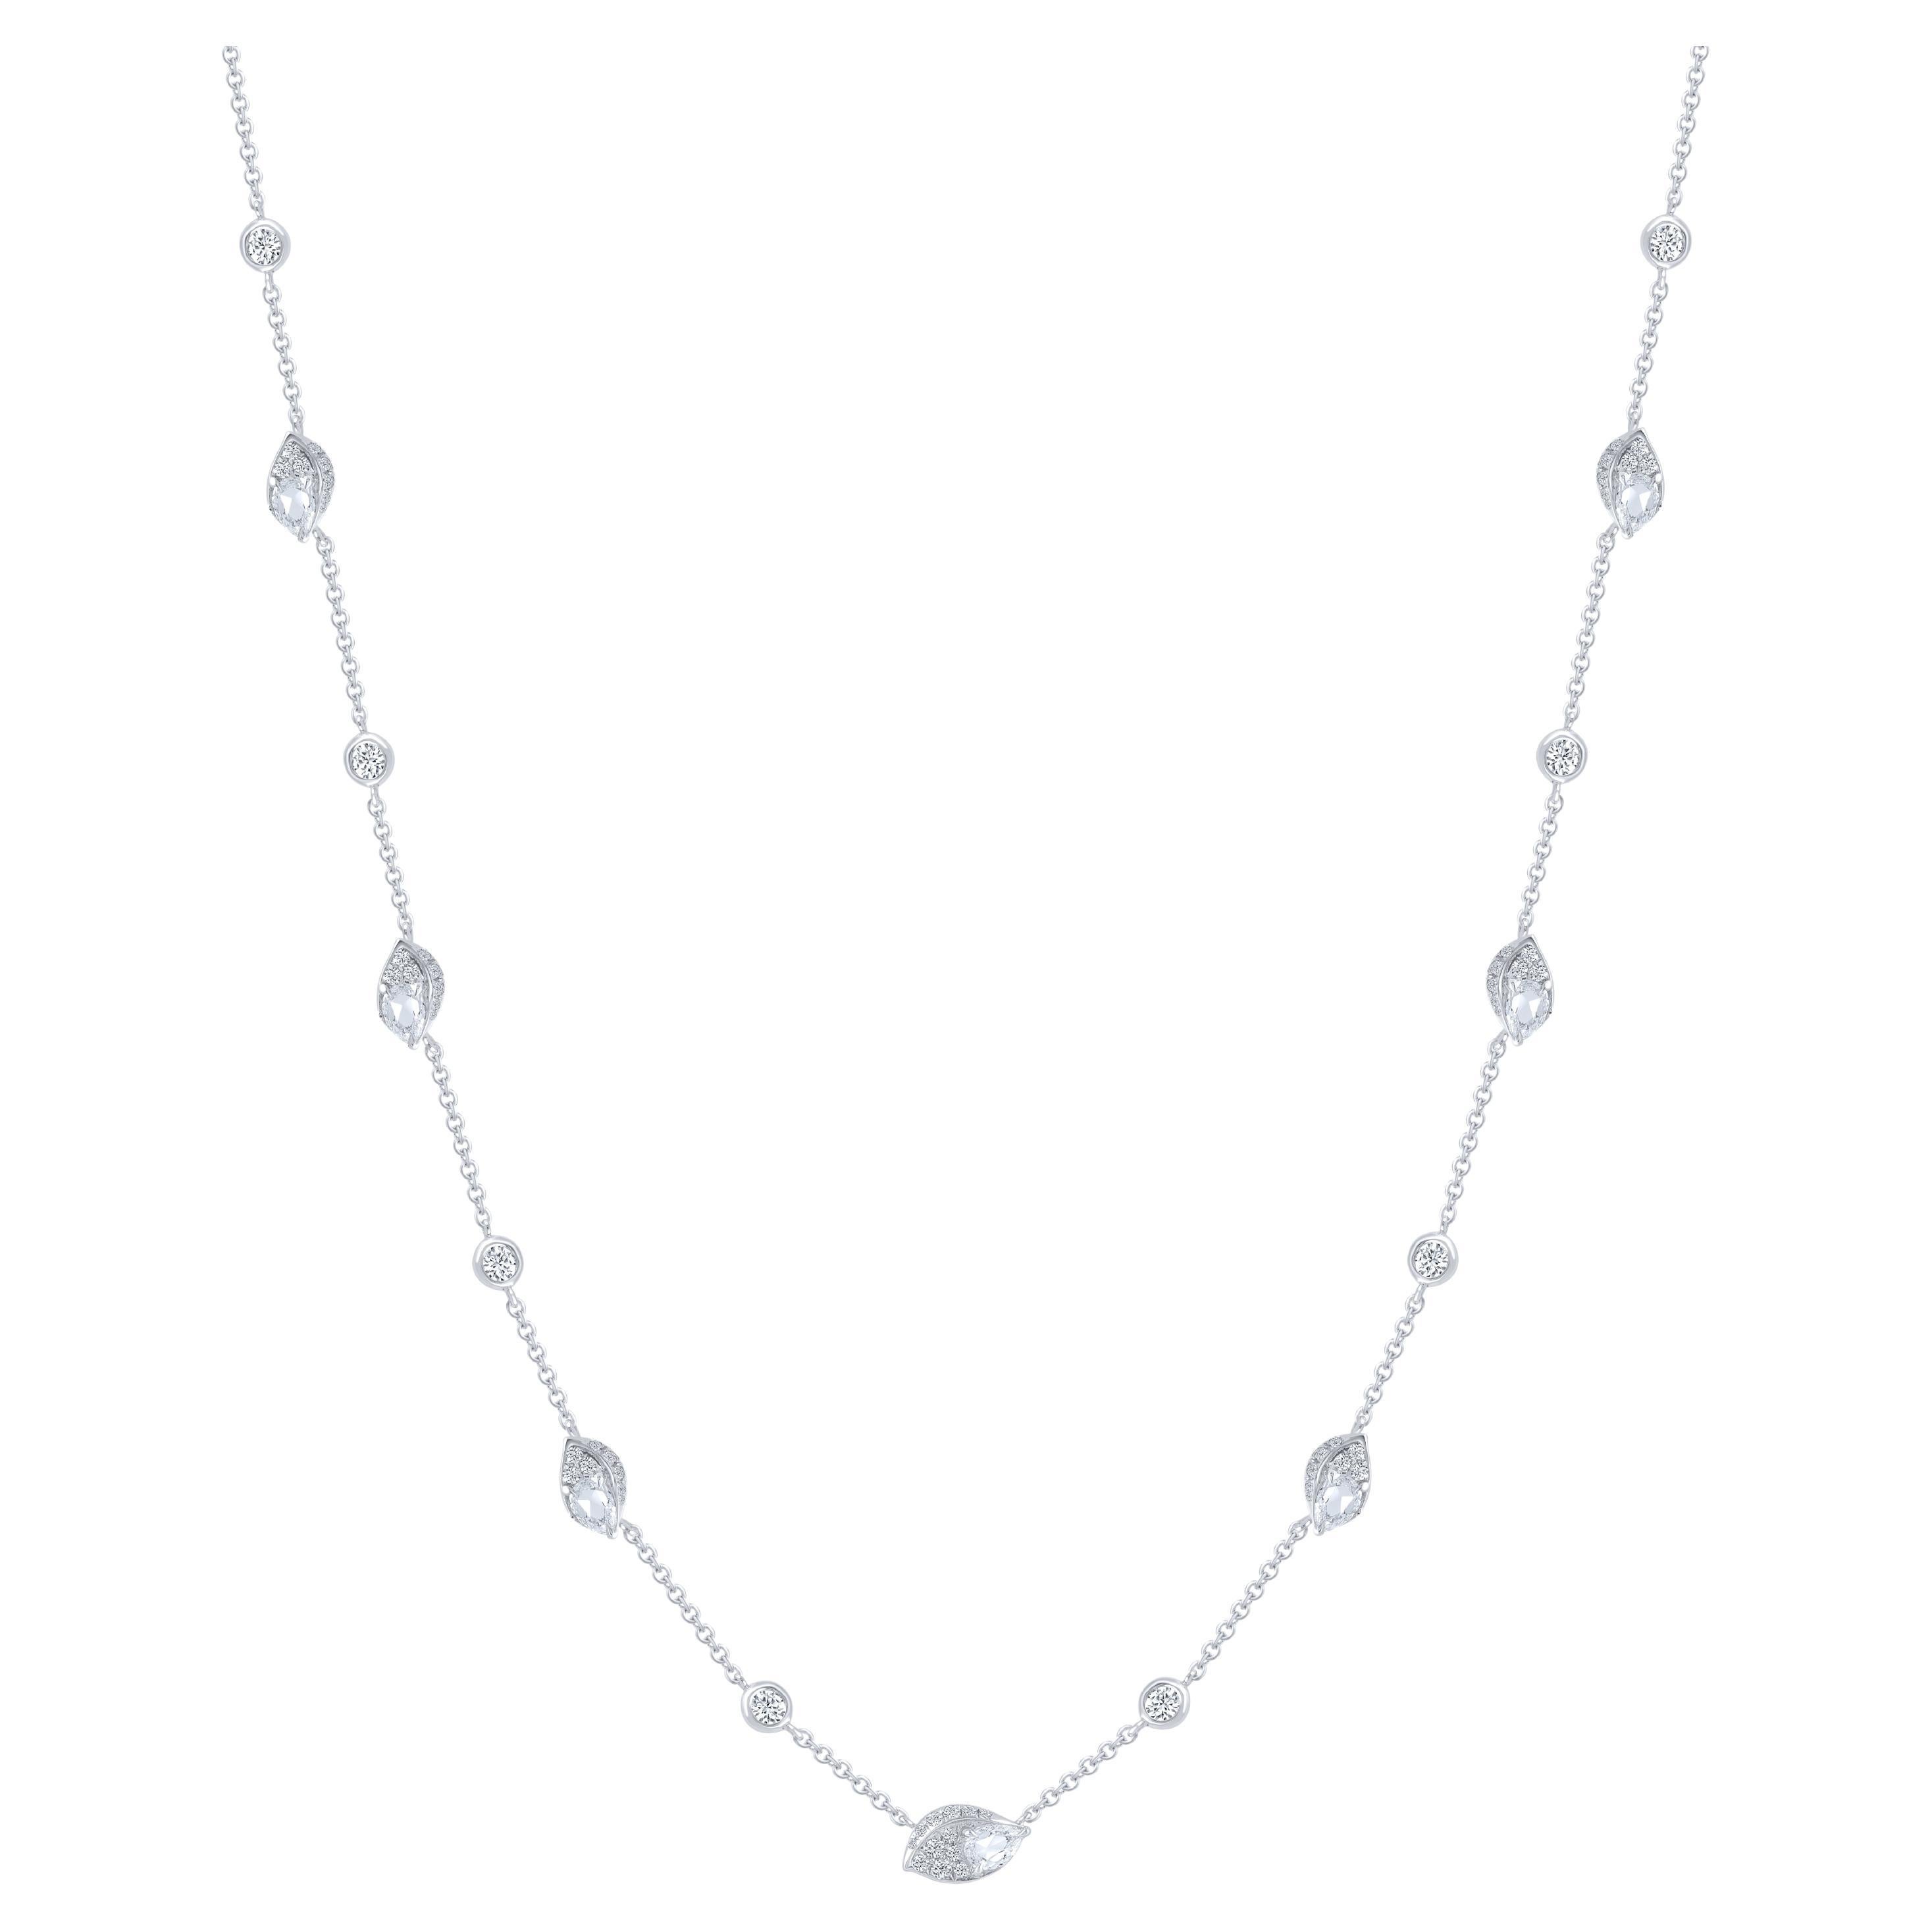 Harakh Colorless Diamond 0.85 Carat Station Necklace in 18 Kt White Gold